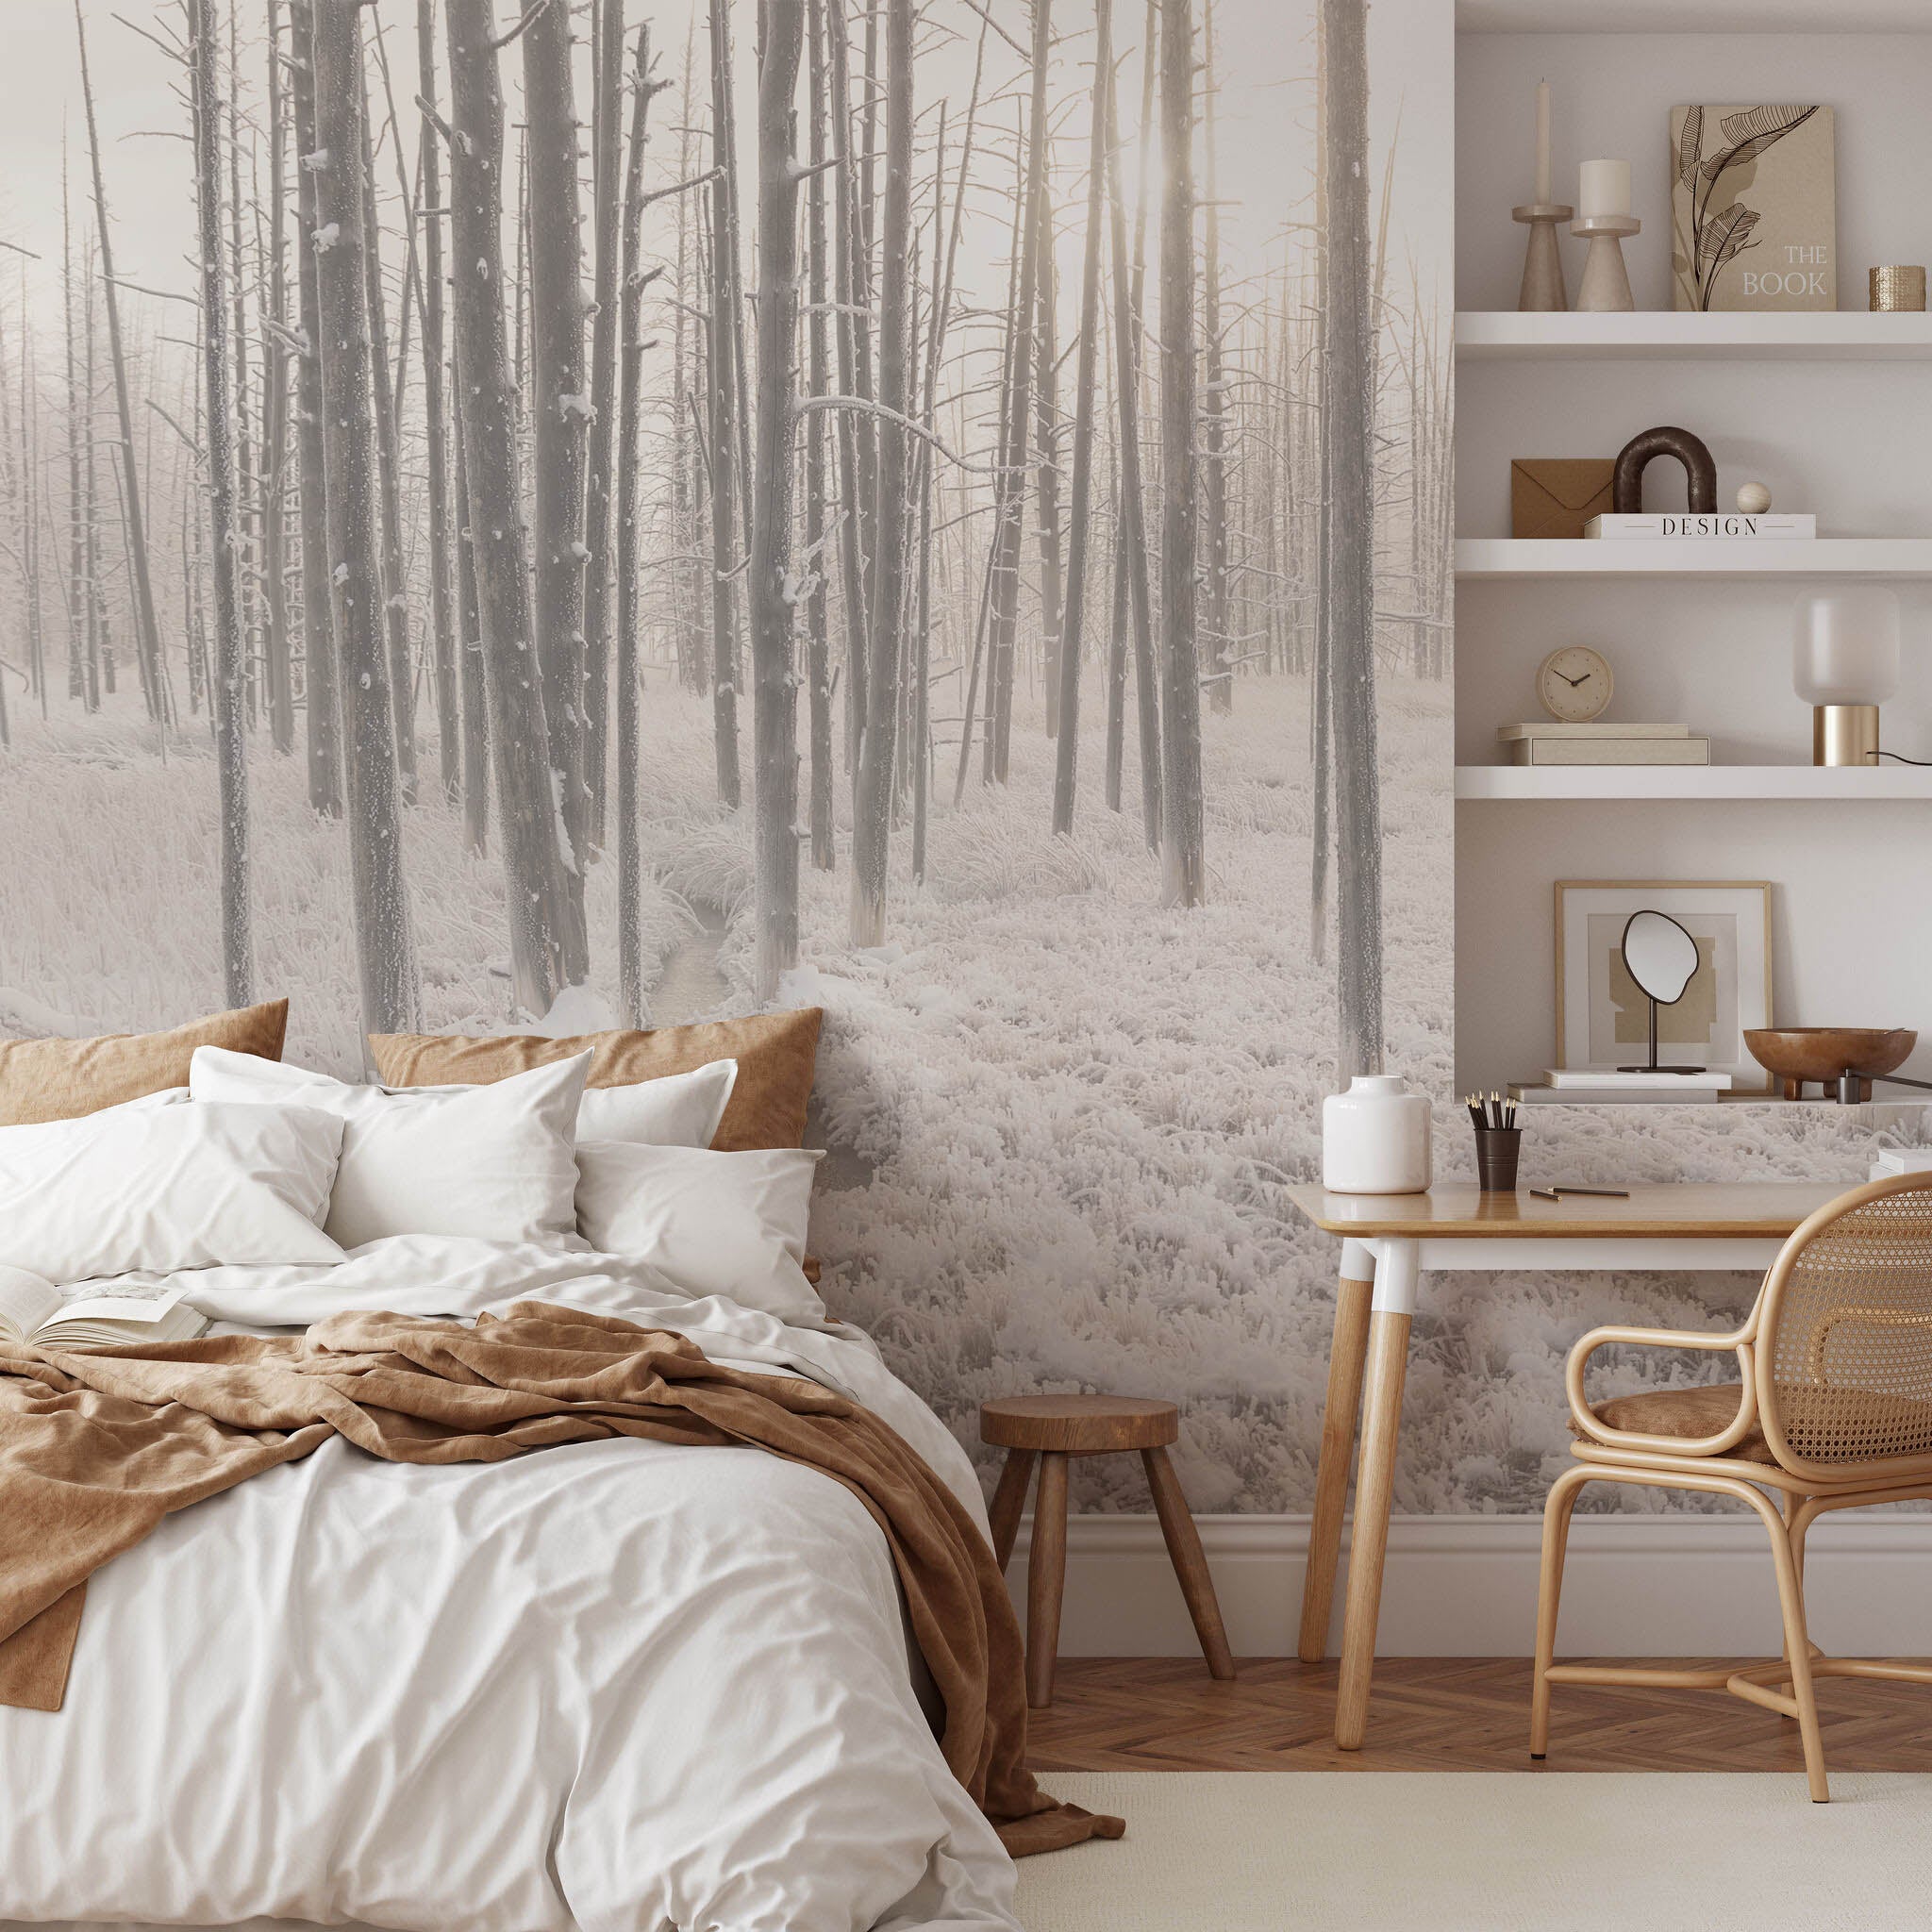 Snowy Forest Creek Wall Mural